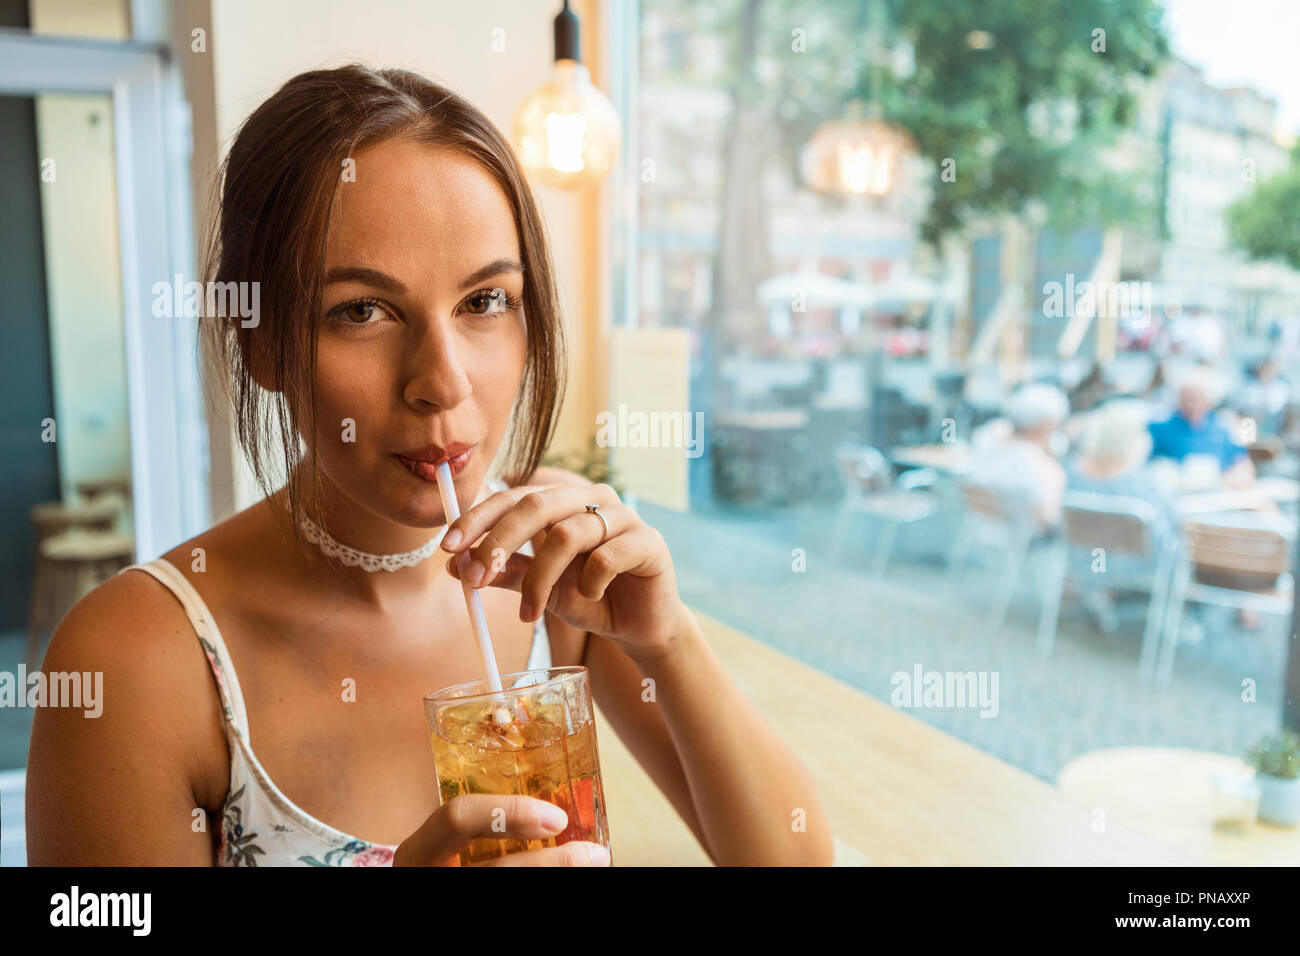 Young brunette woman having ice tea at a café Stock Photo